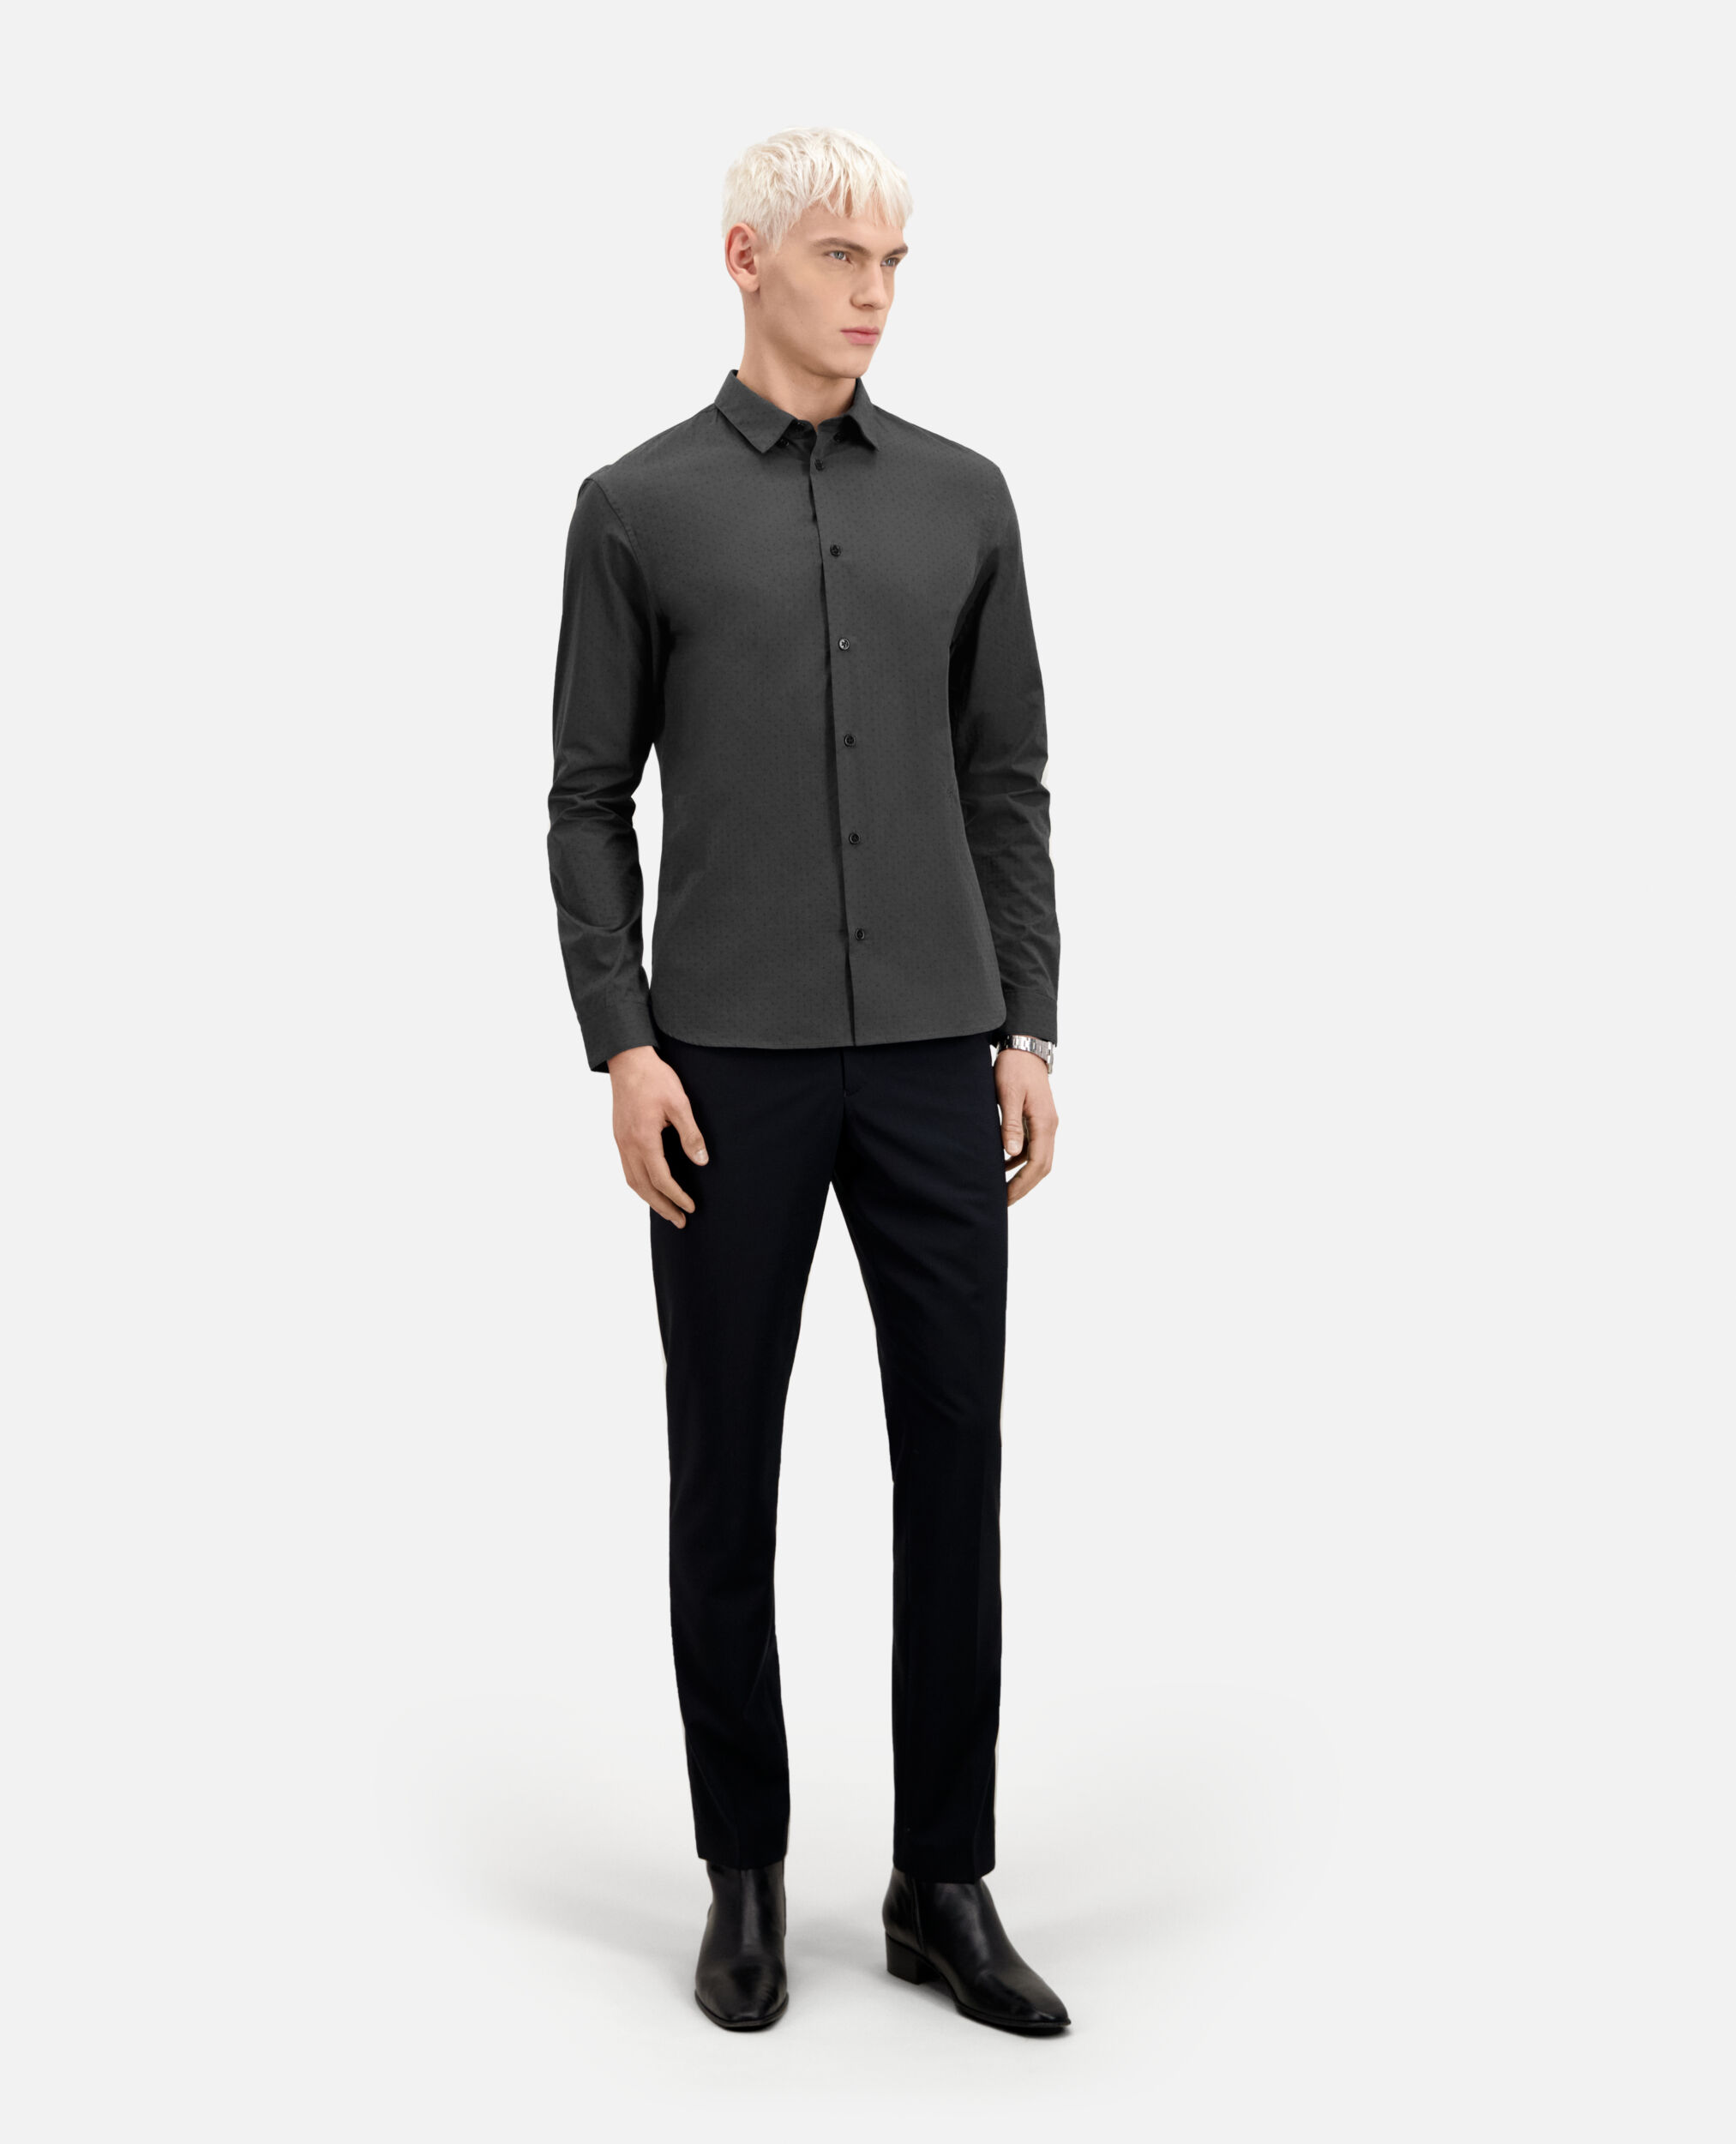 Charcoal gray shirt with micro patterns, BLACK, hi-res image number null